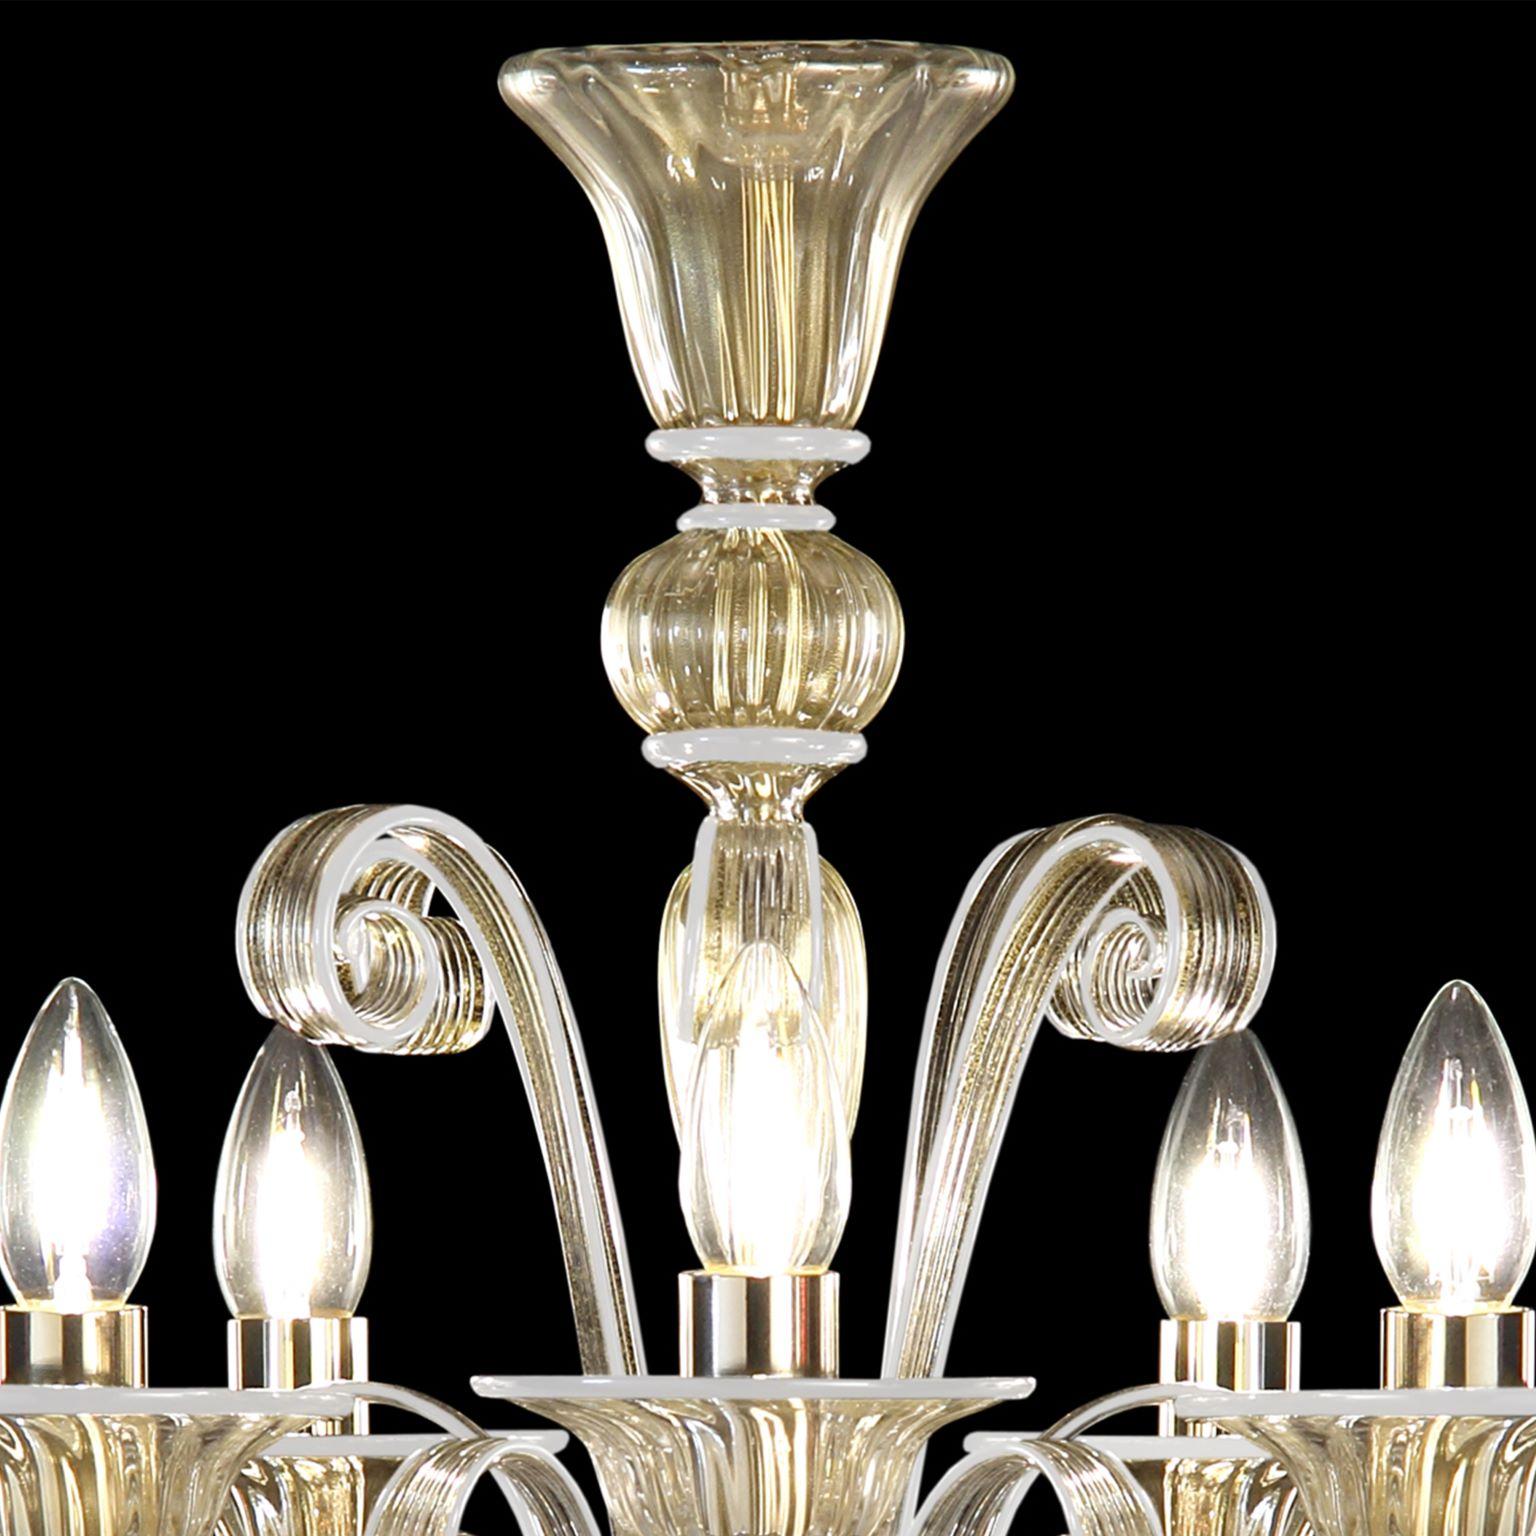 Italian Chandelier 5 Arms Golden Leaf Artistic Murano Glass White Details by Multiforme For Sale